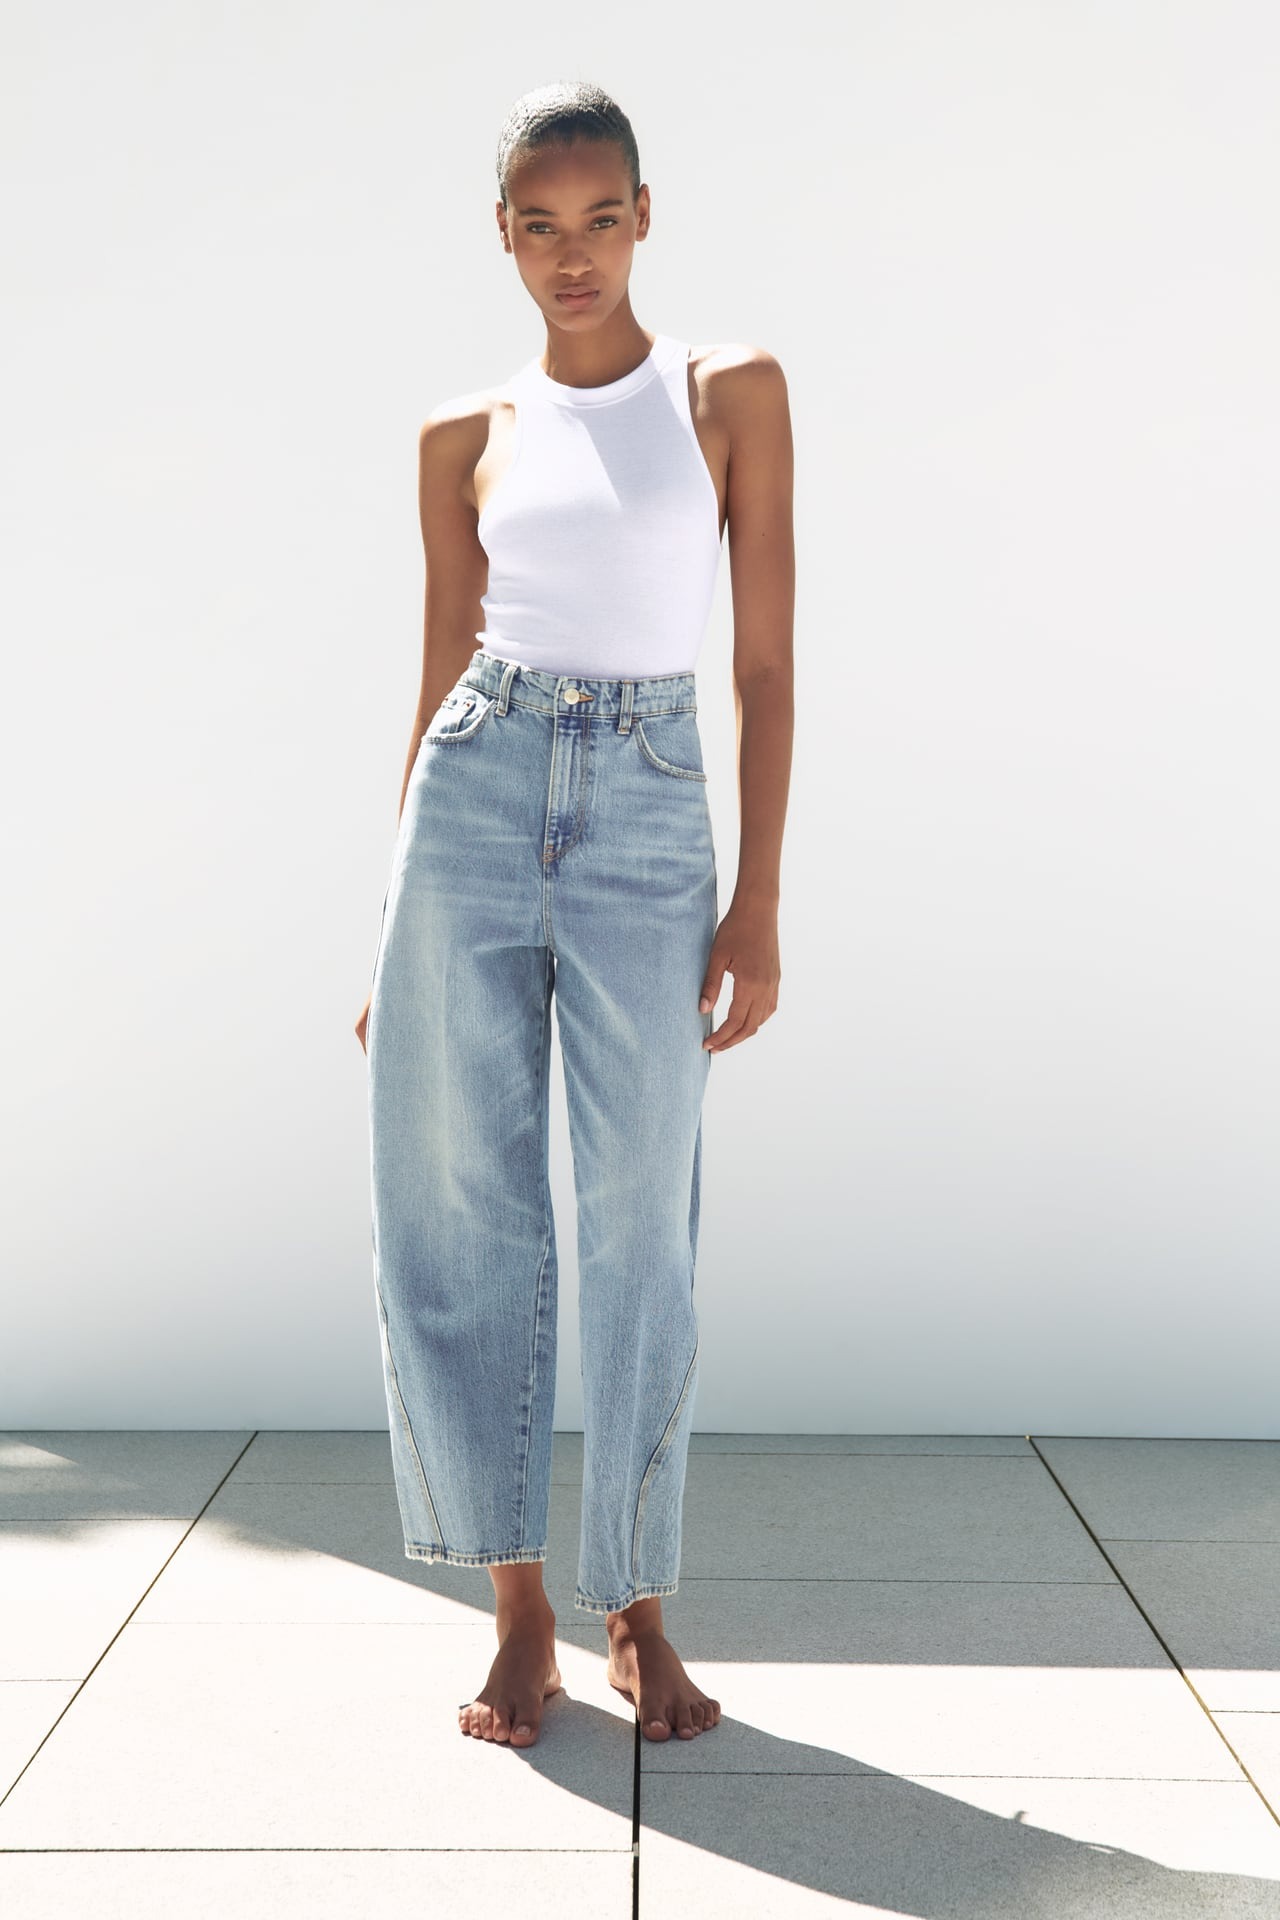 The 23 Best Mid-Rise Jeans for Women | Who What Wear